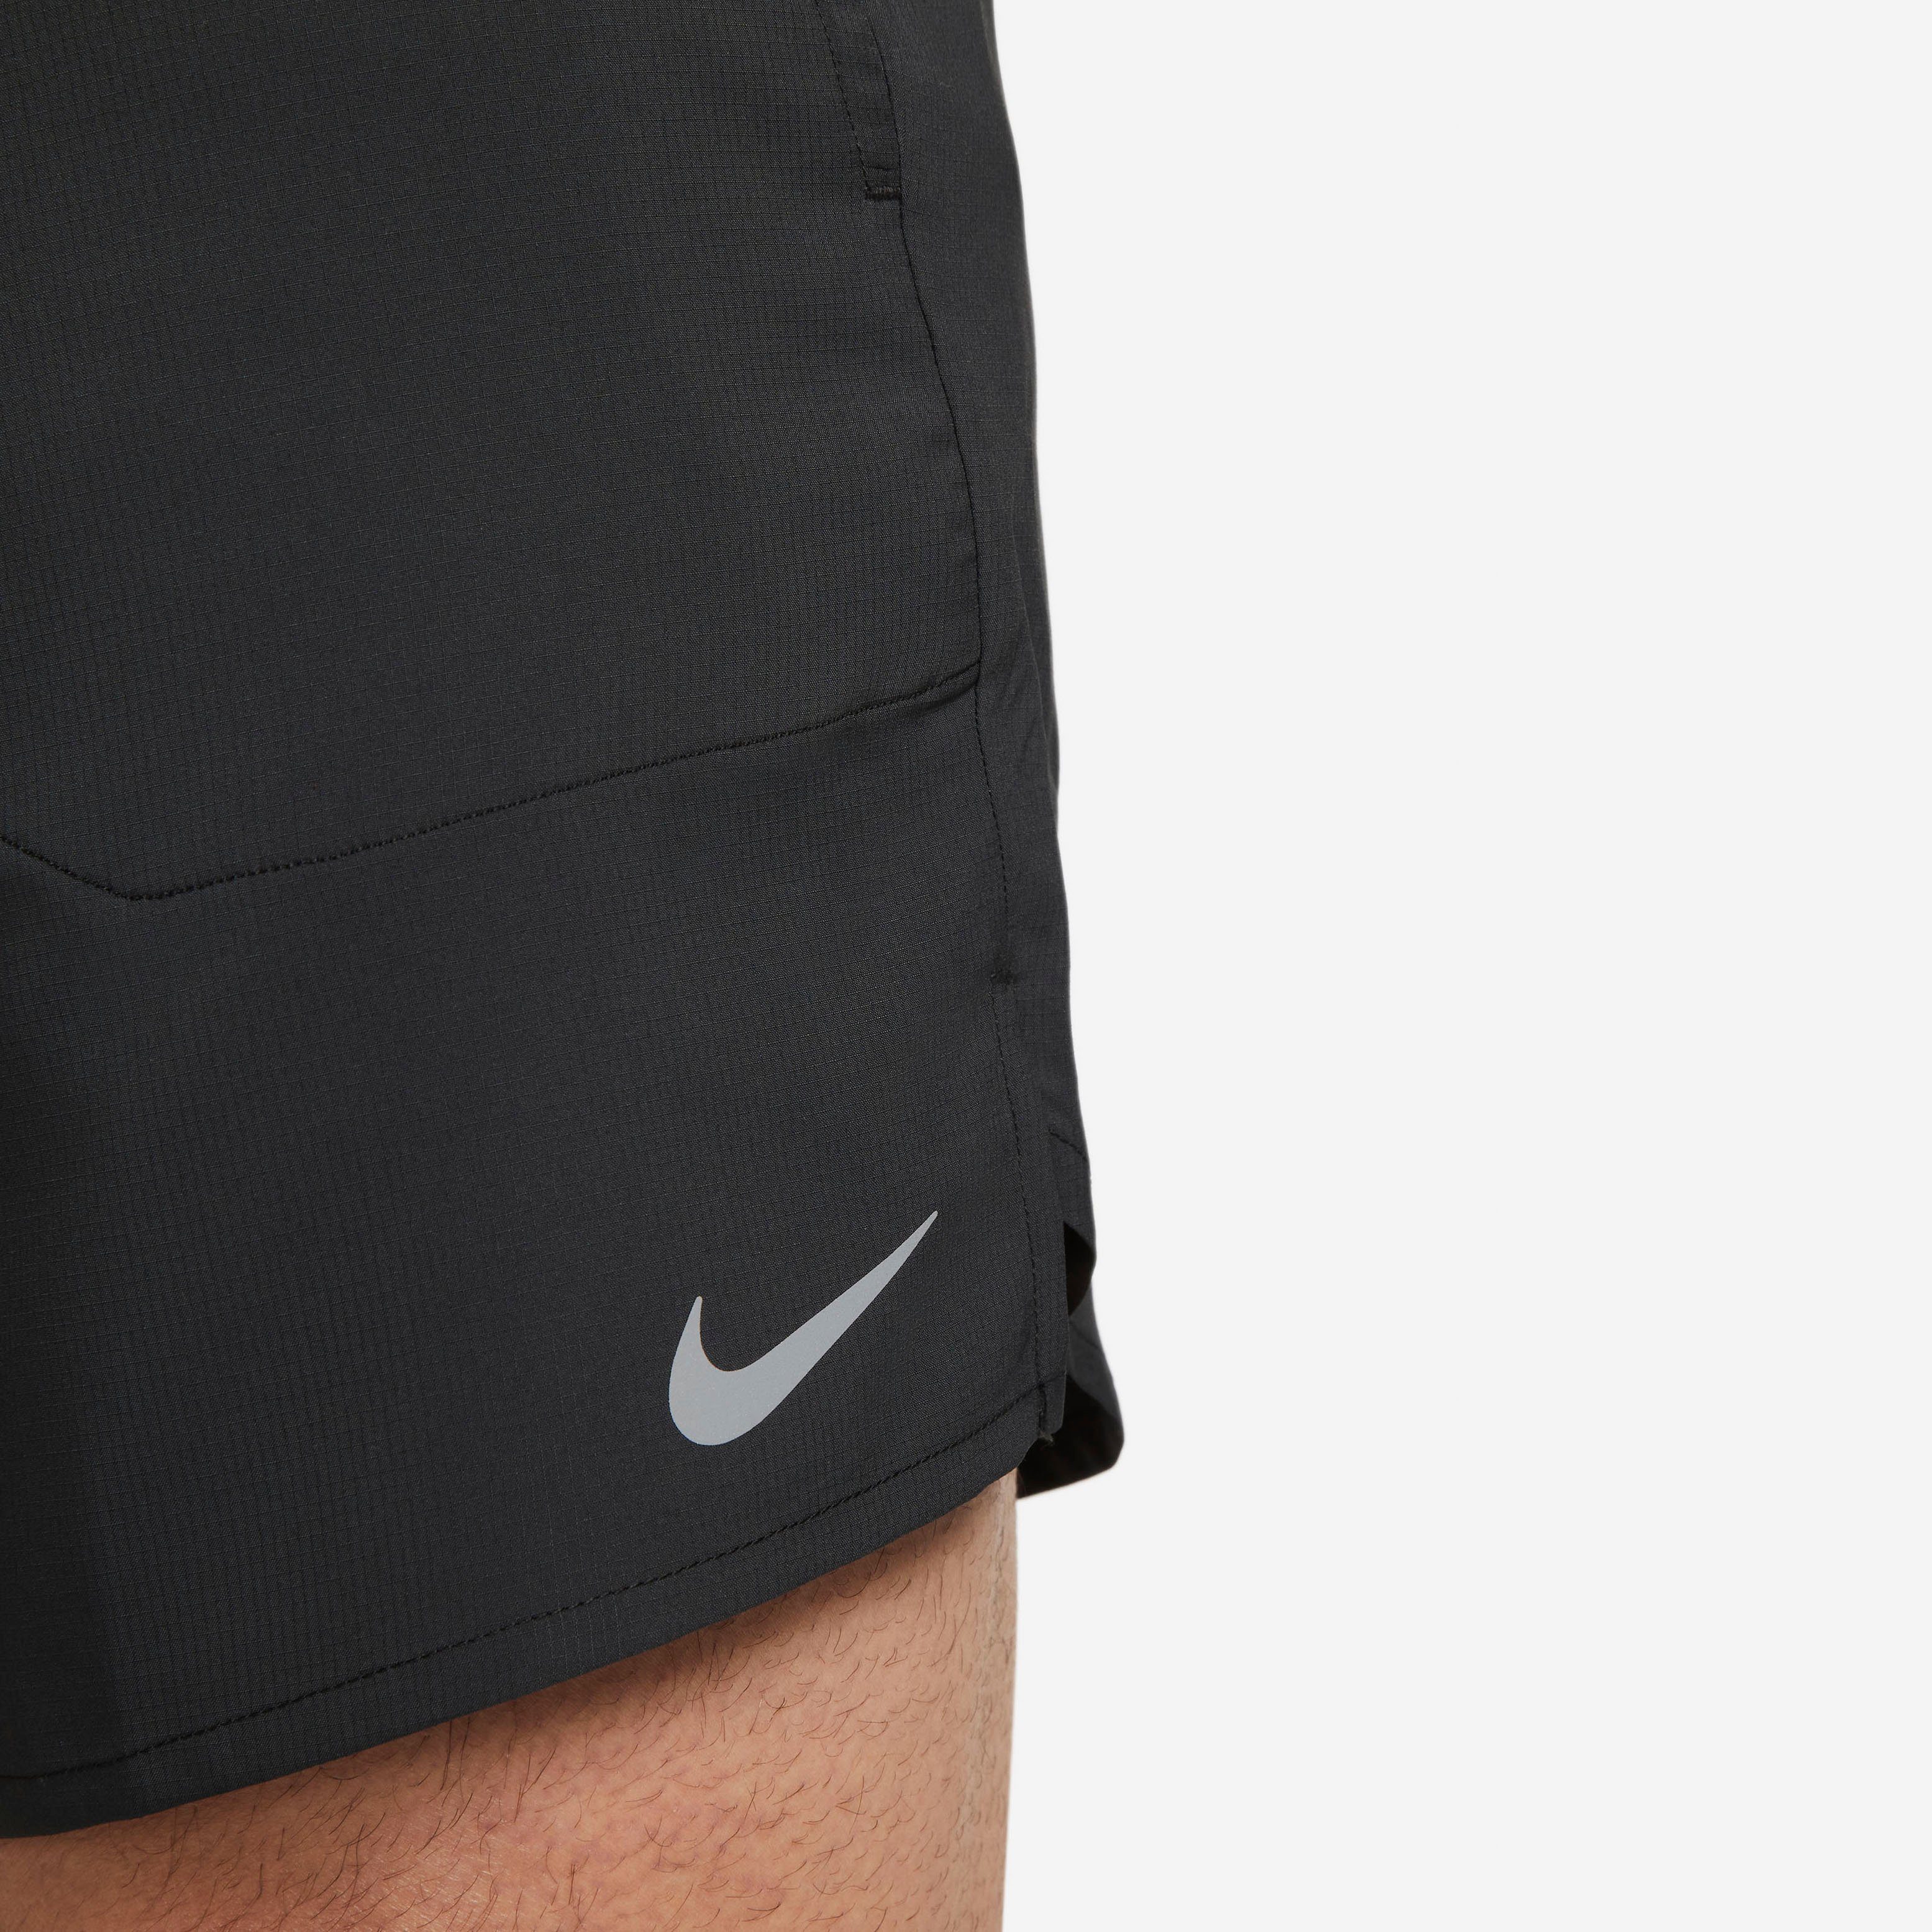 Running Brief-Lined Nike " Shorts Dri-FIT Stride Laufshorts Men's